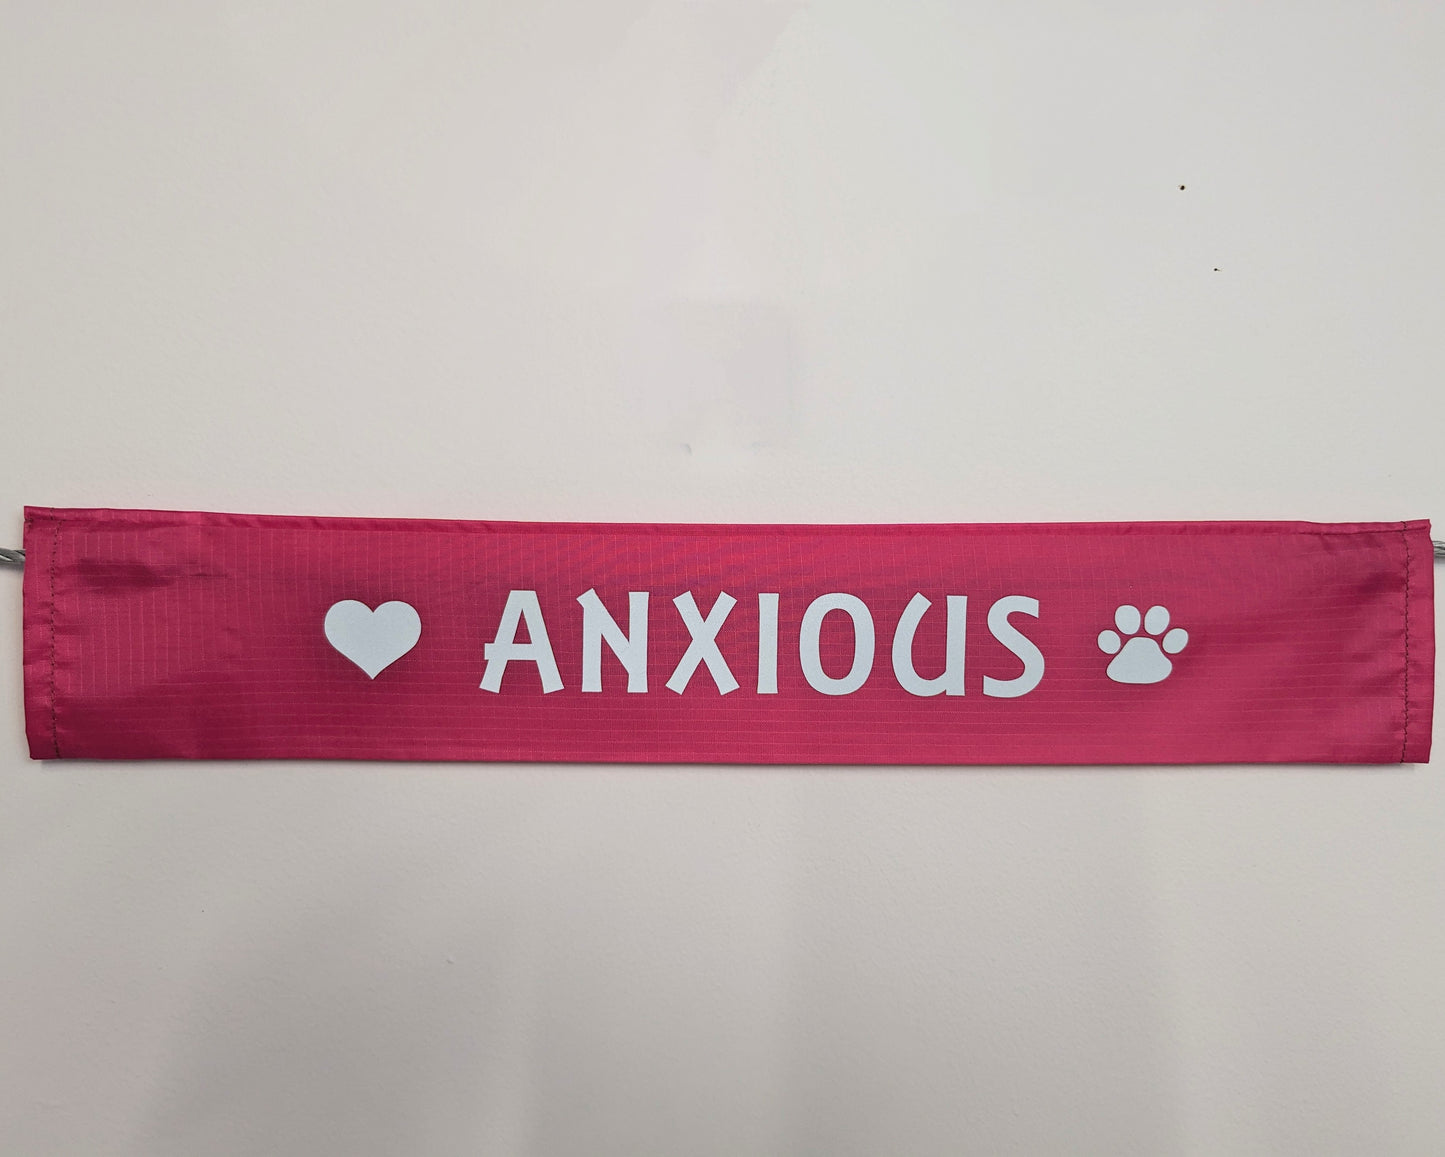 "ANXIOUS"  Dog lead sleeve / cover in PINK. For dog leash - canine training - puppy socialising - reactive dog - support dog